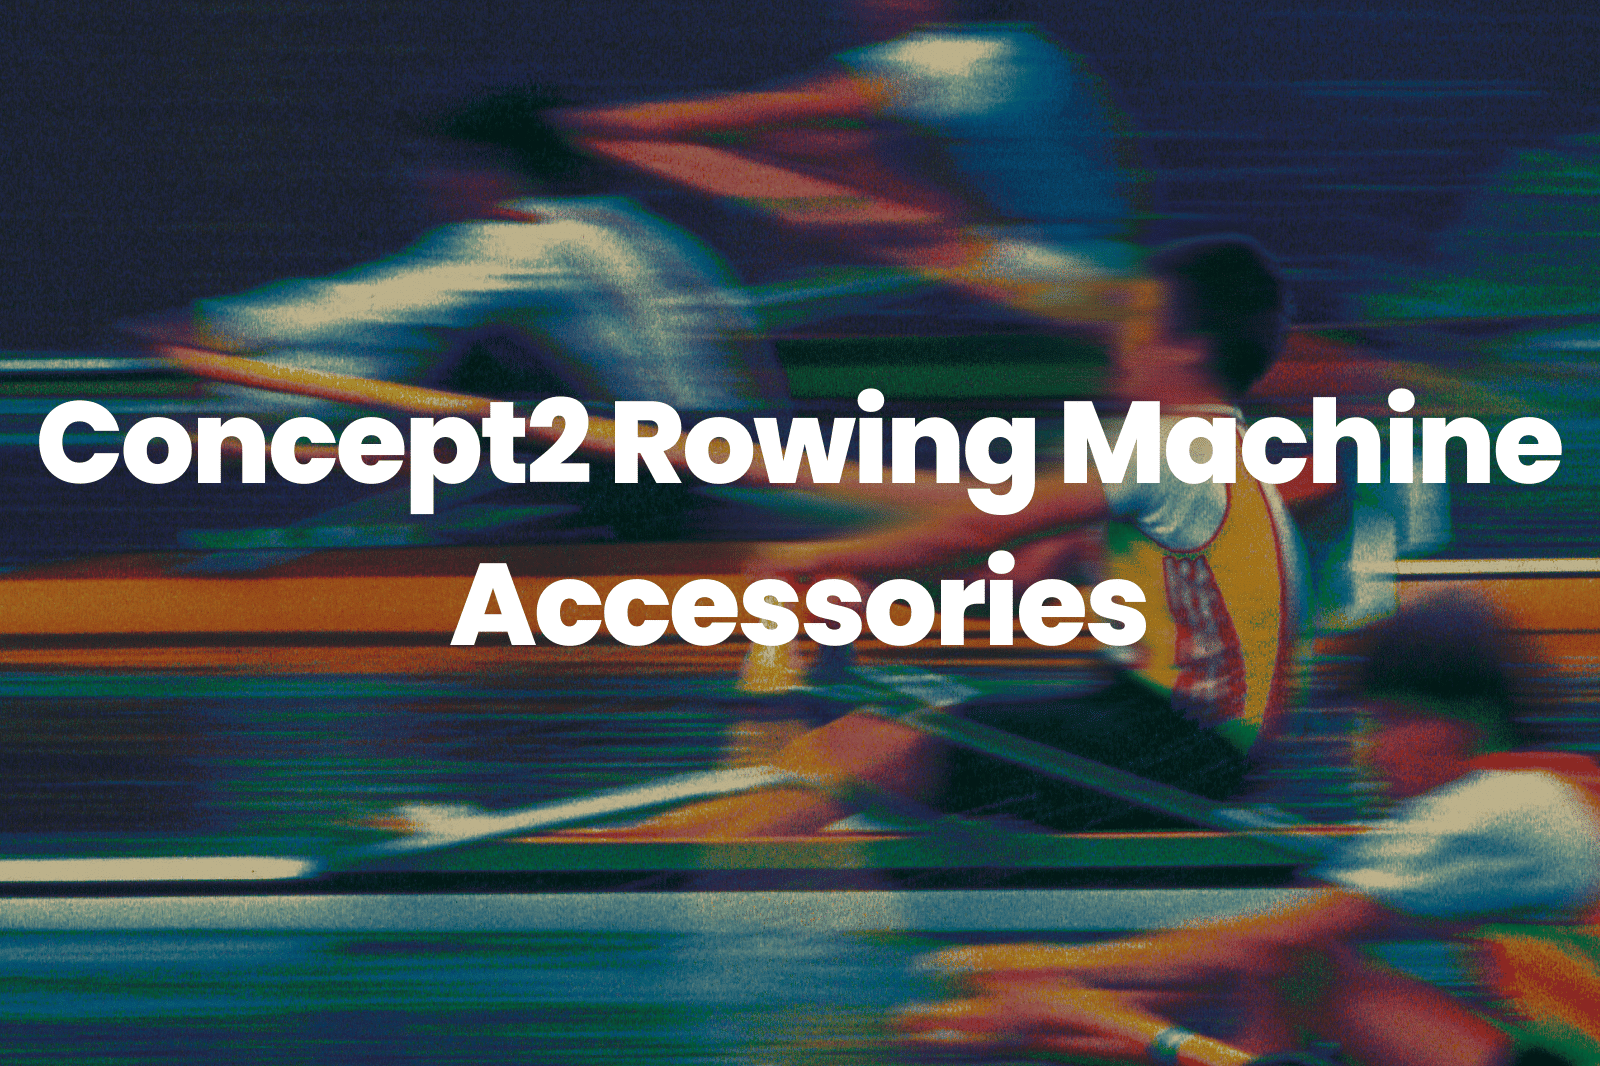 Concept2 Rowing Machine Accessories